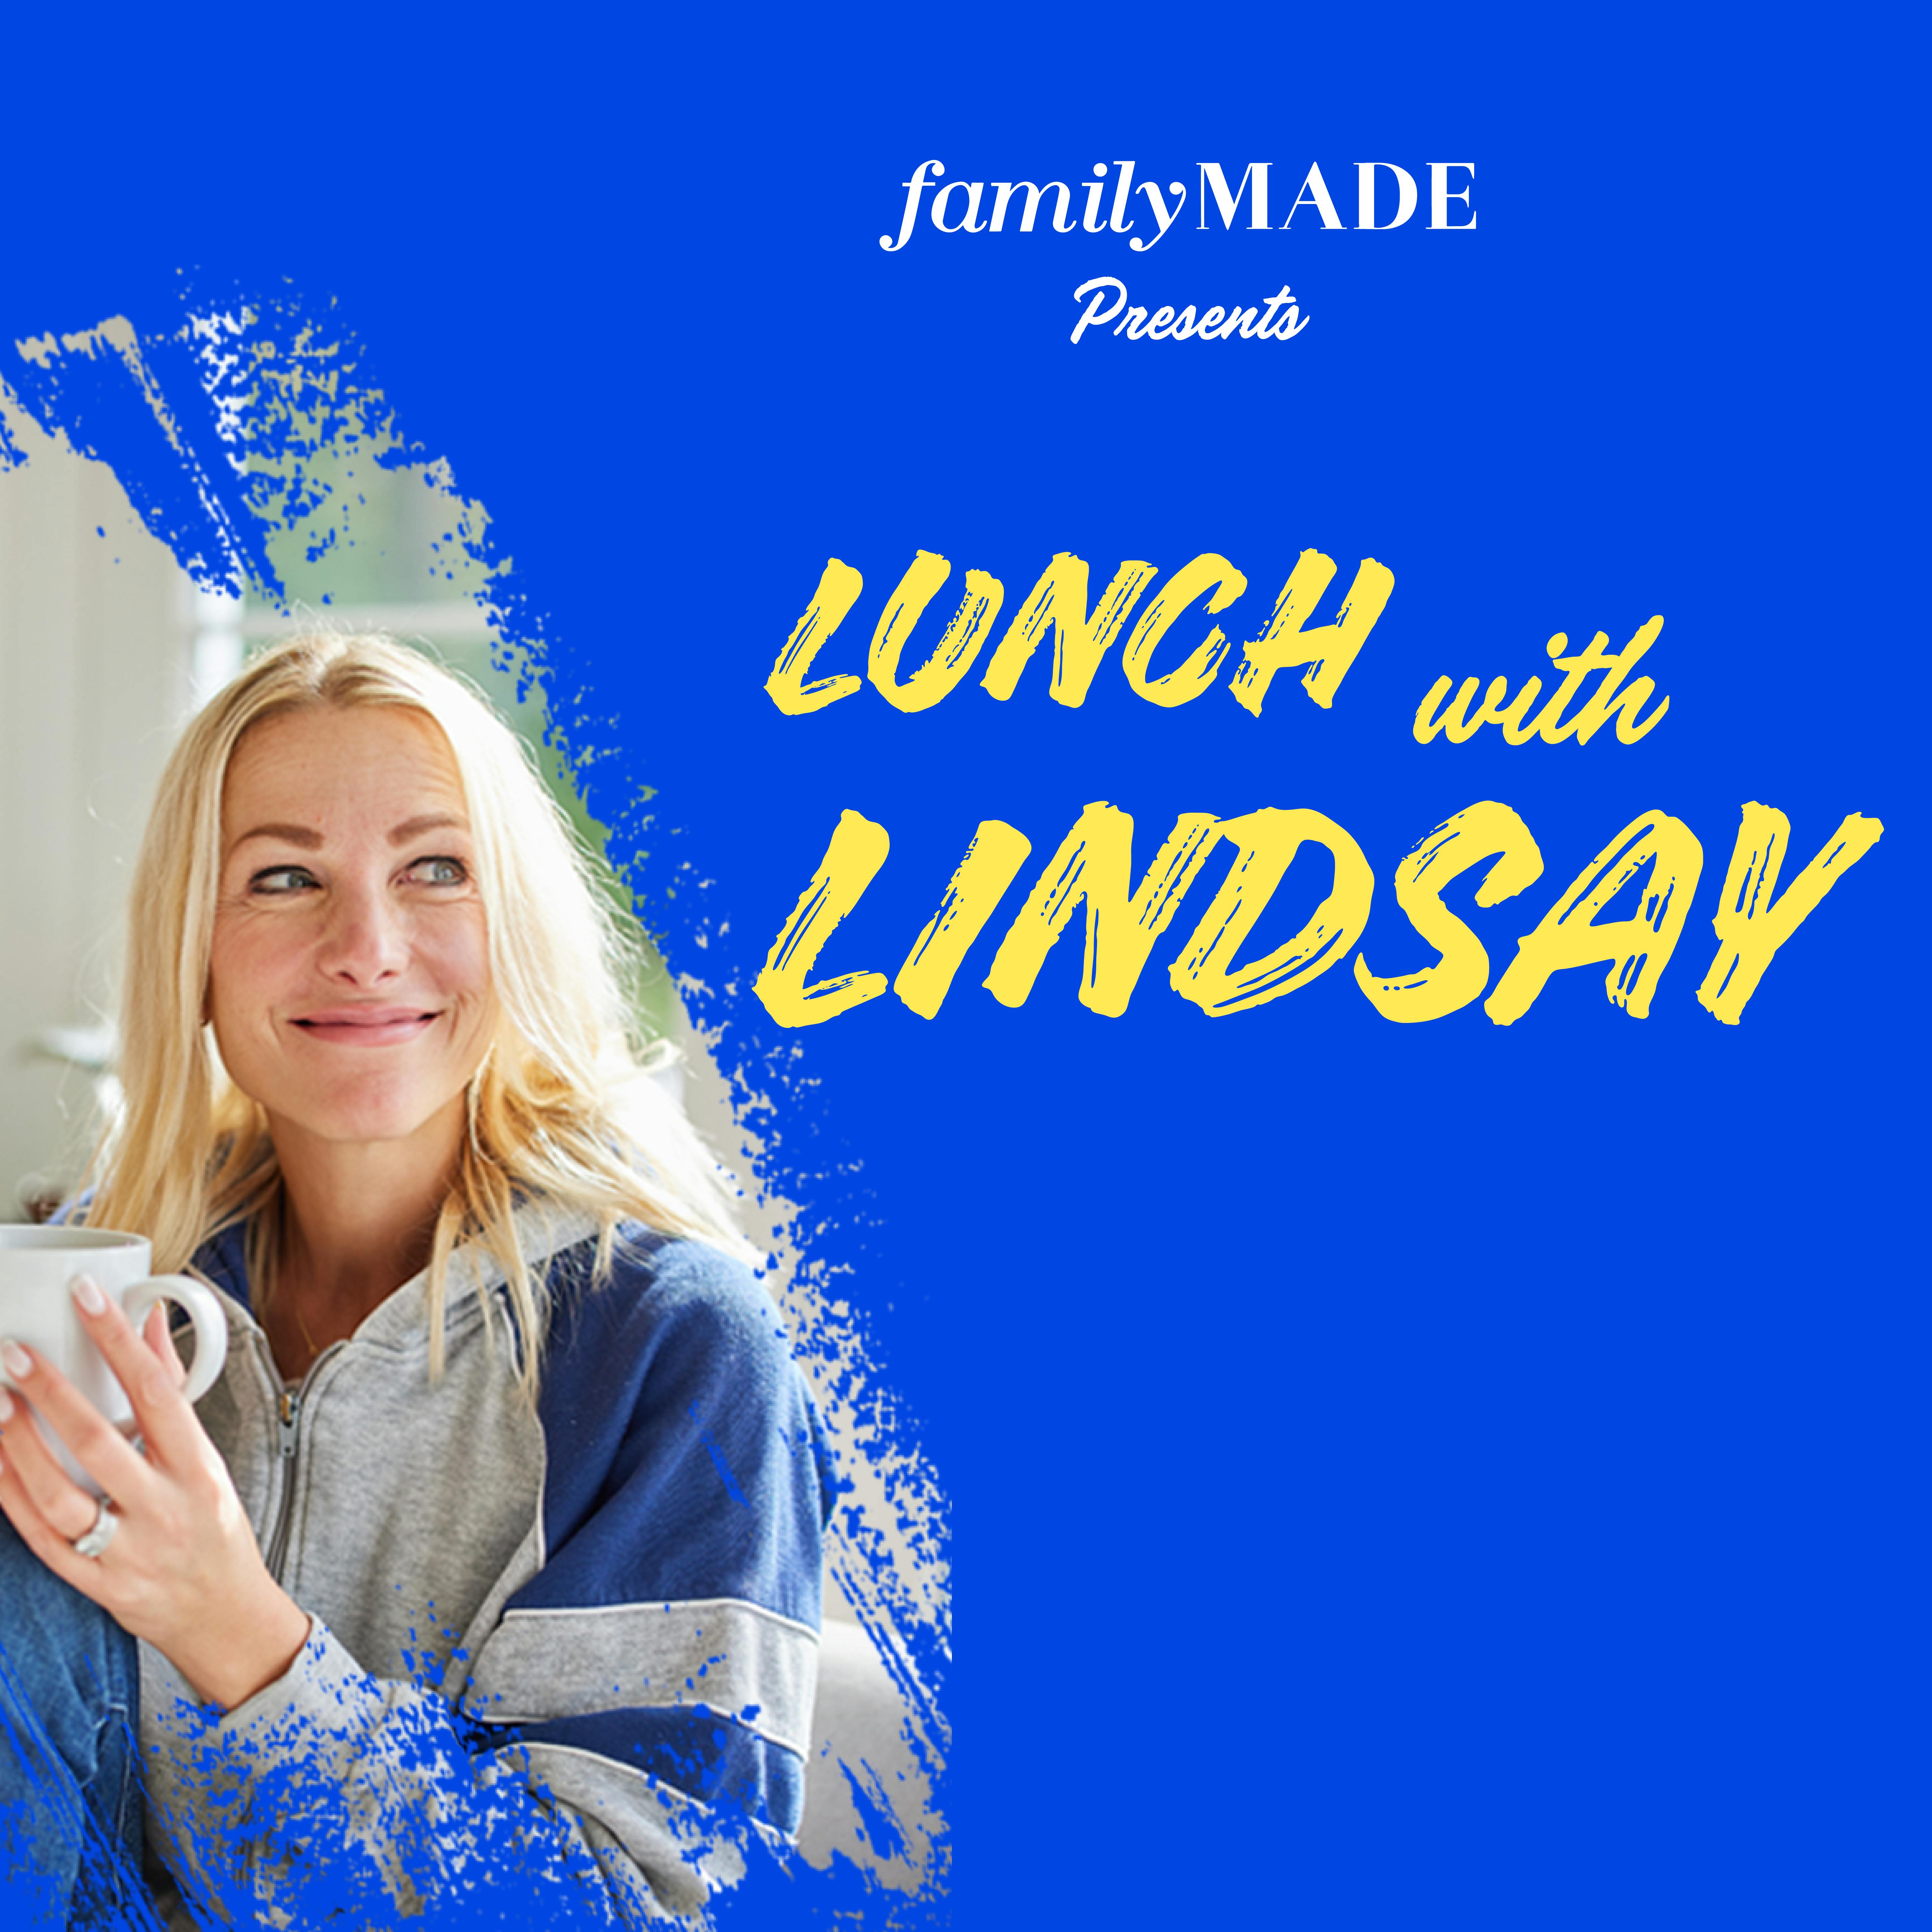 Lunch with Lindsay - football, friendship and fake it til you make it